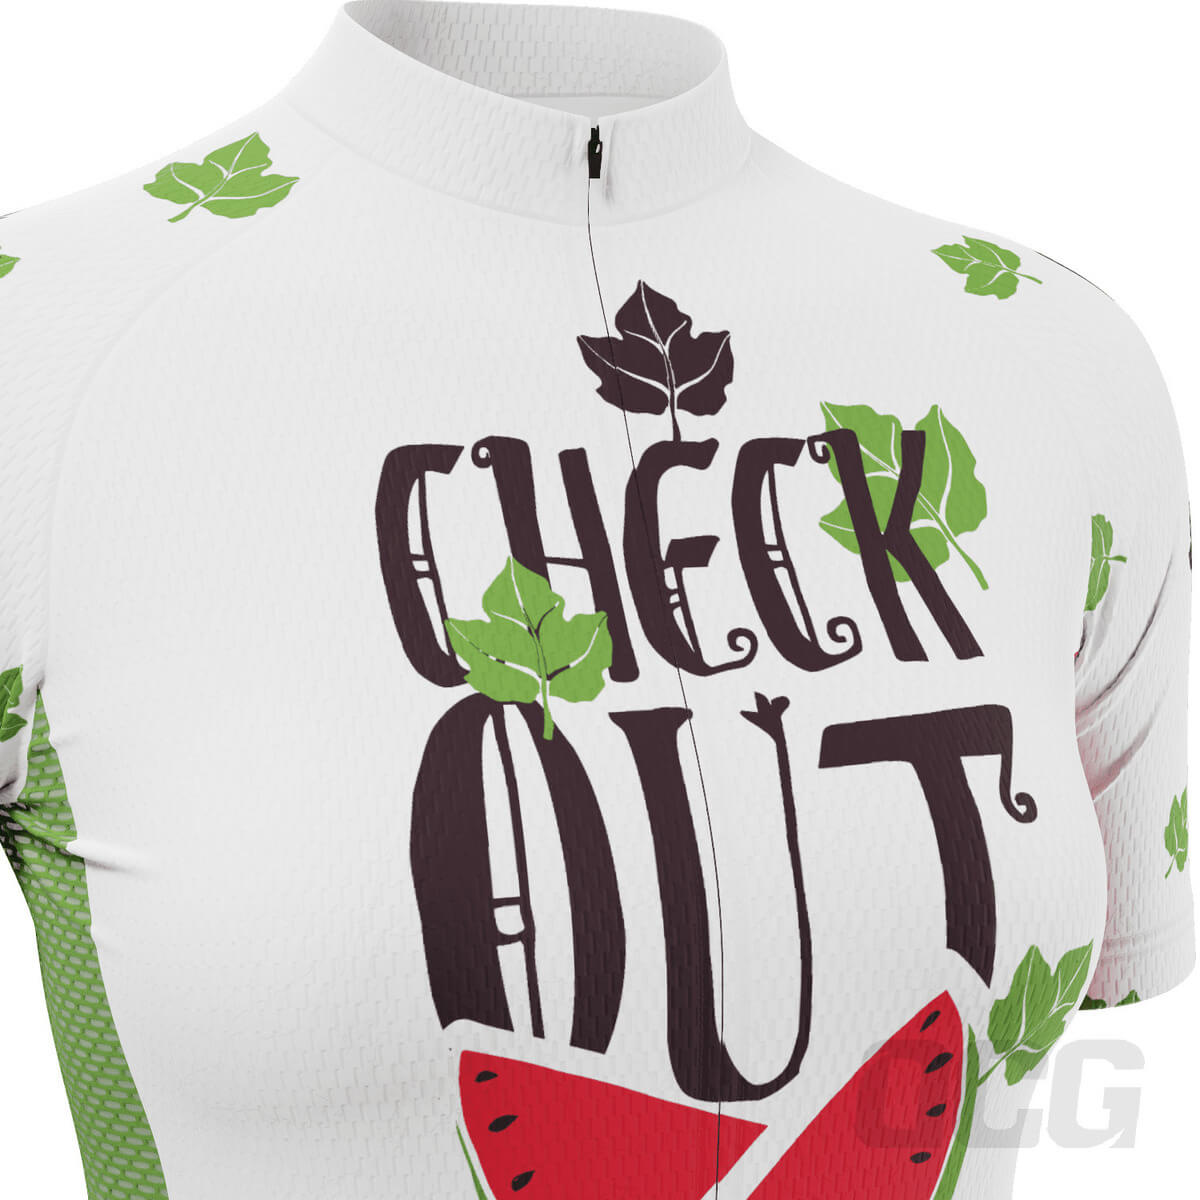 Women's Check Out These Melons Short Sleeve Cycling Jersey